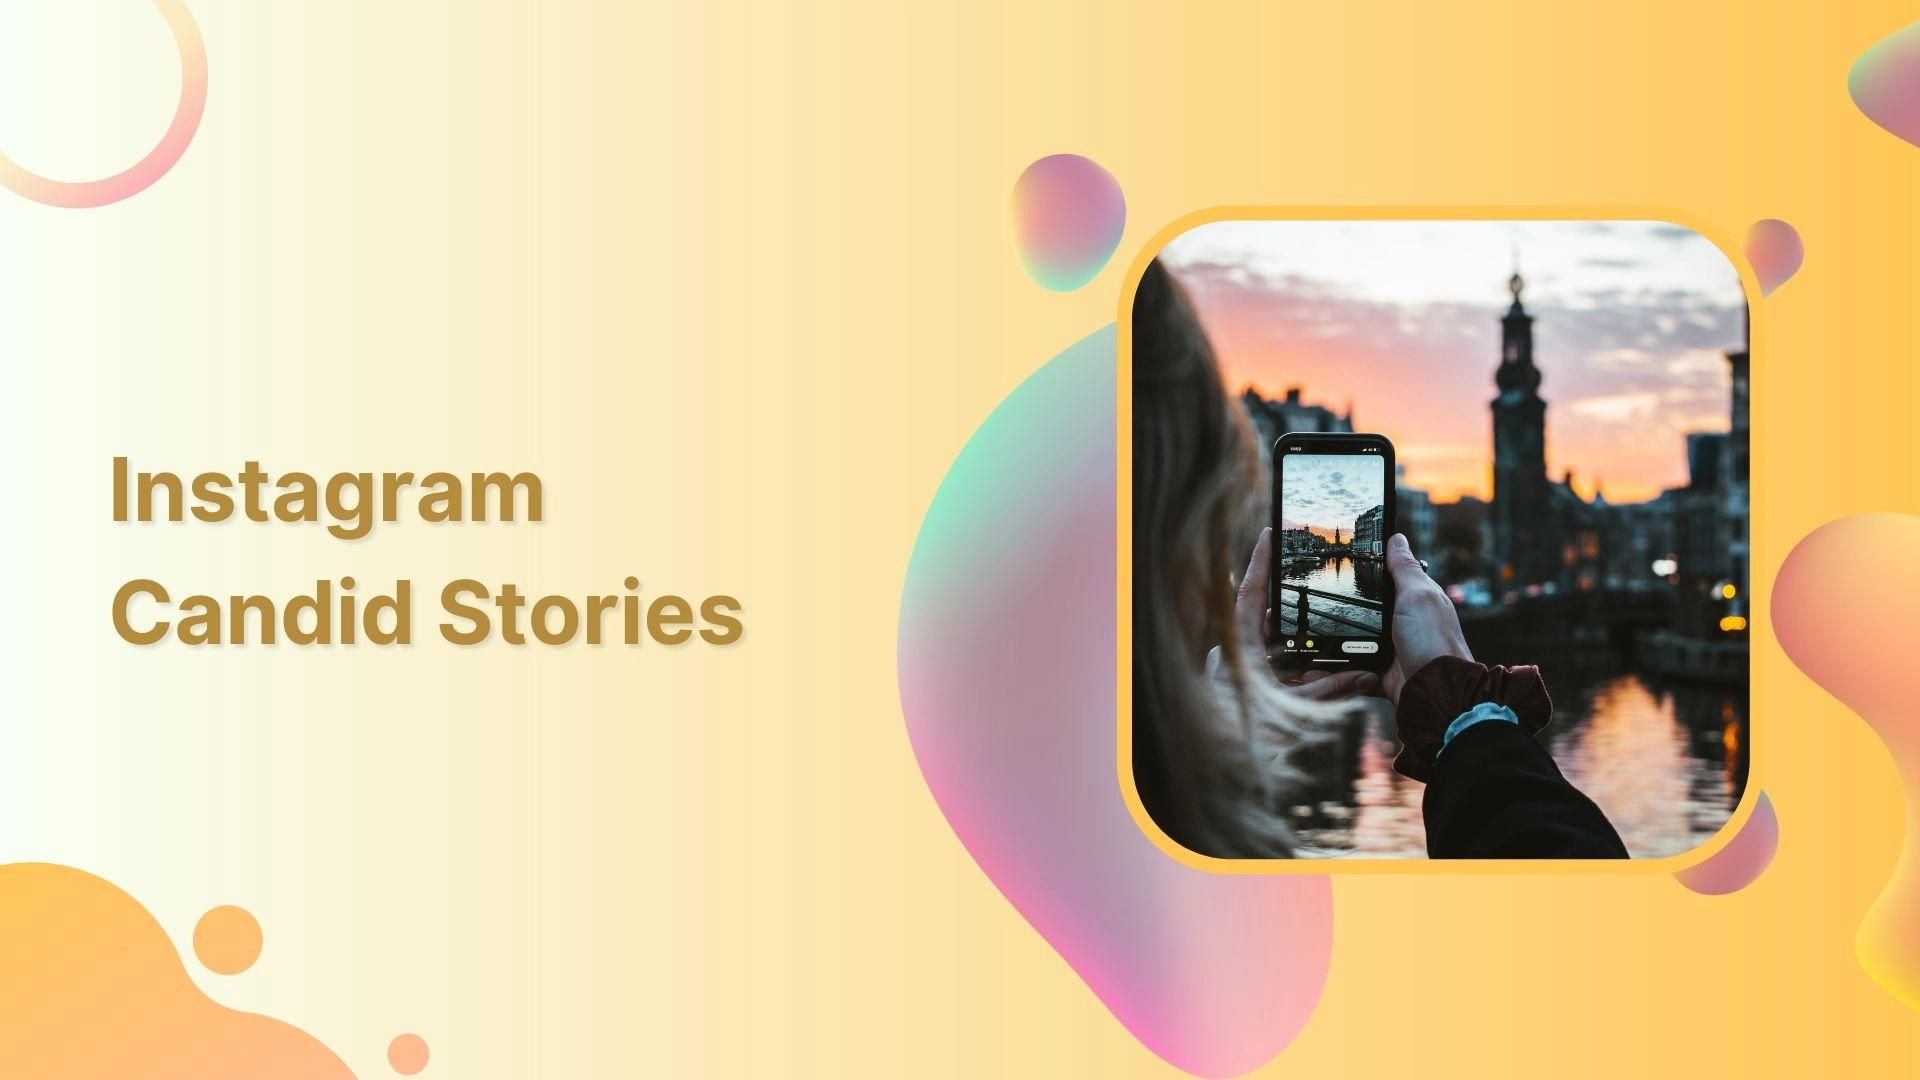 How Does The Candid Stories Feature Work?